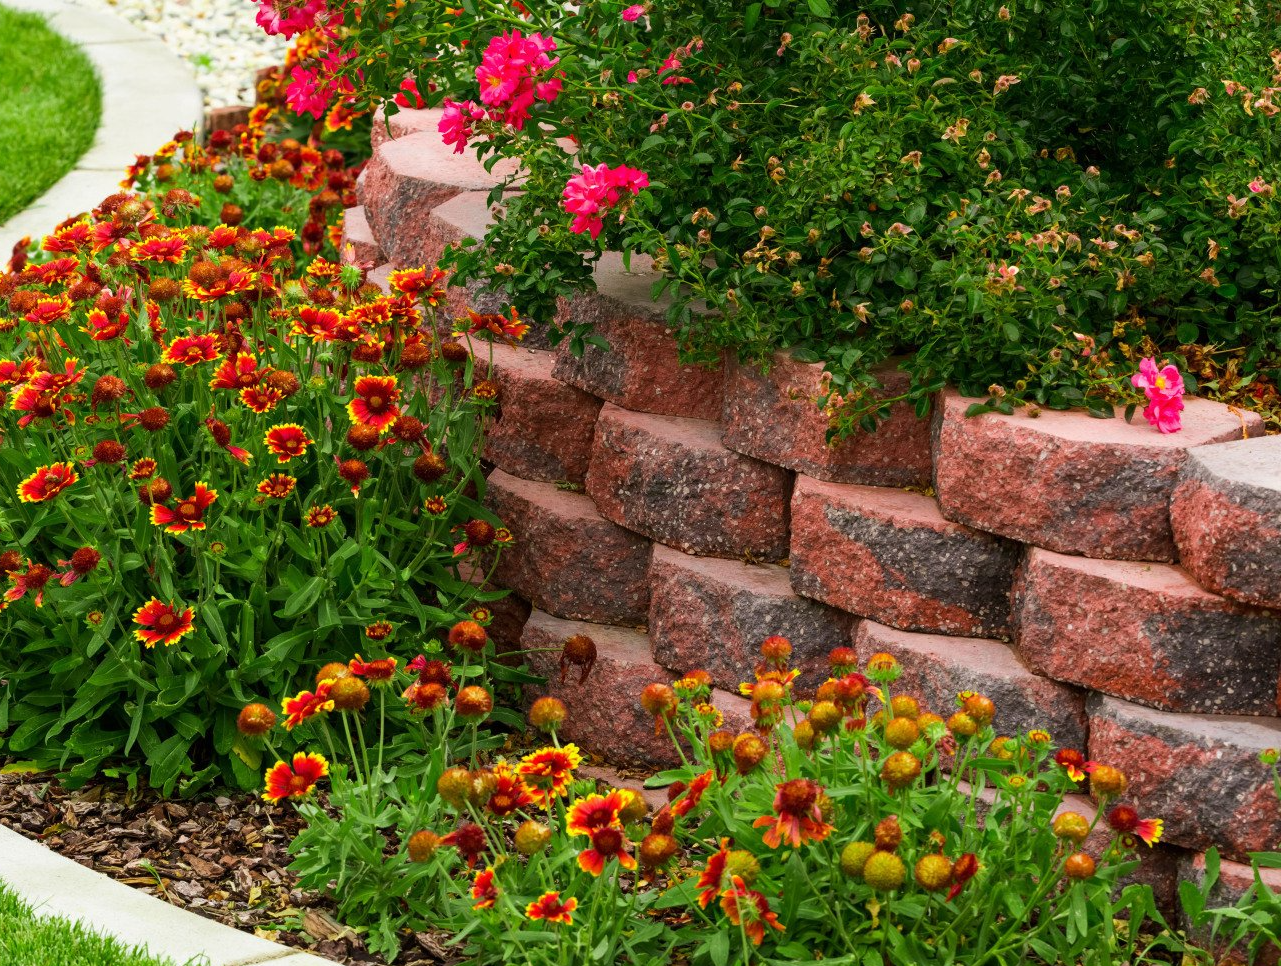 Stone and Retaining Wall Services